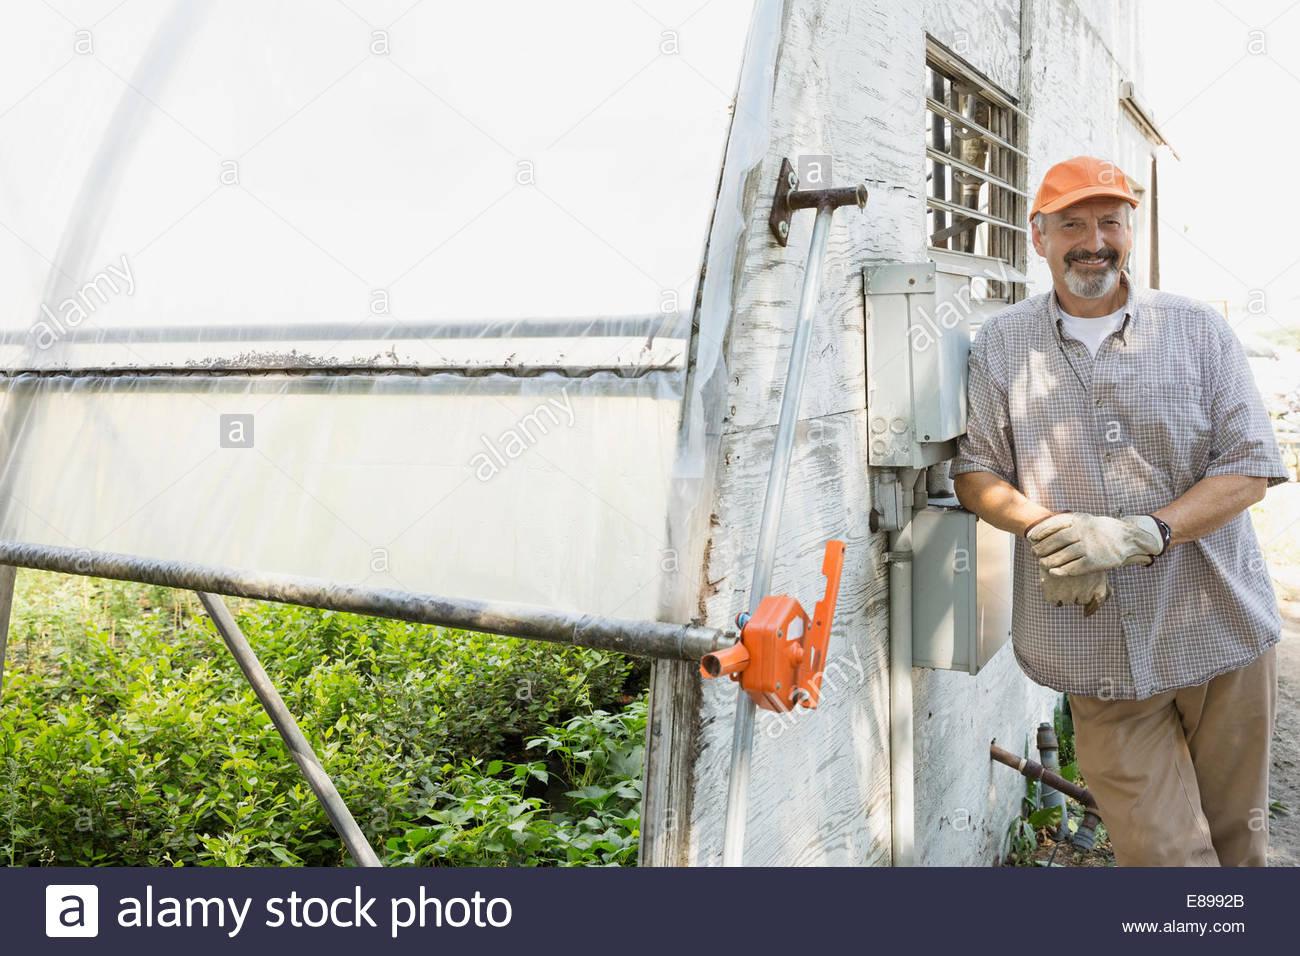 Portrait of smiling worker outside greenhouse Stock Photo